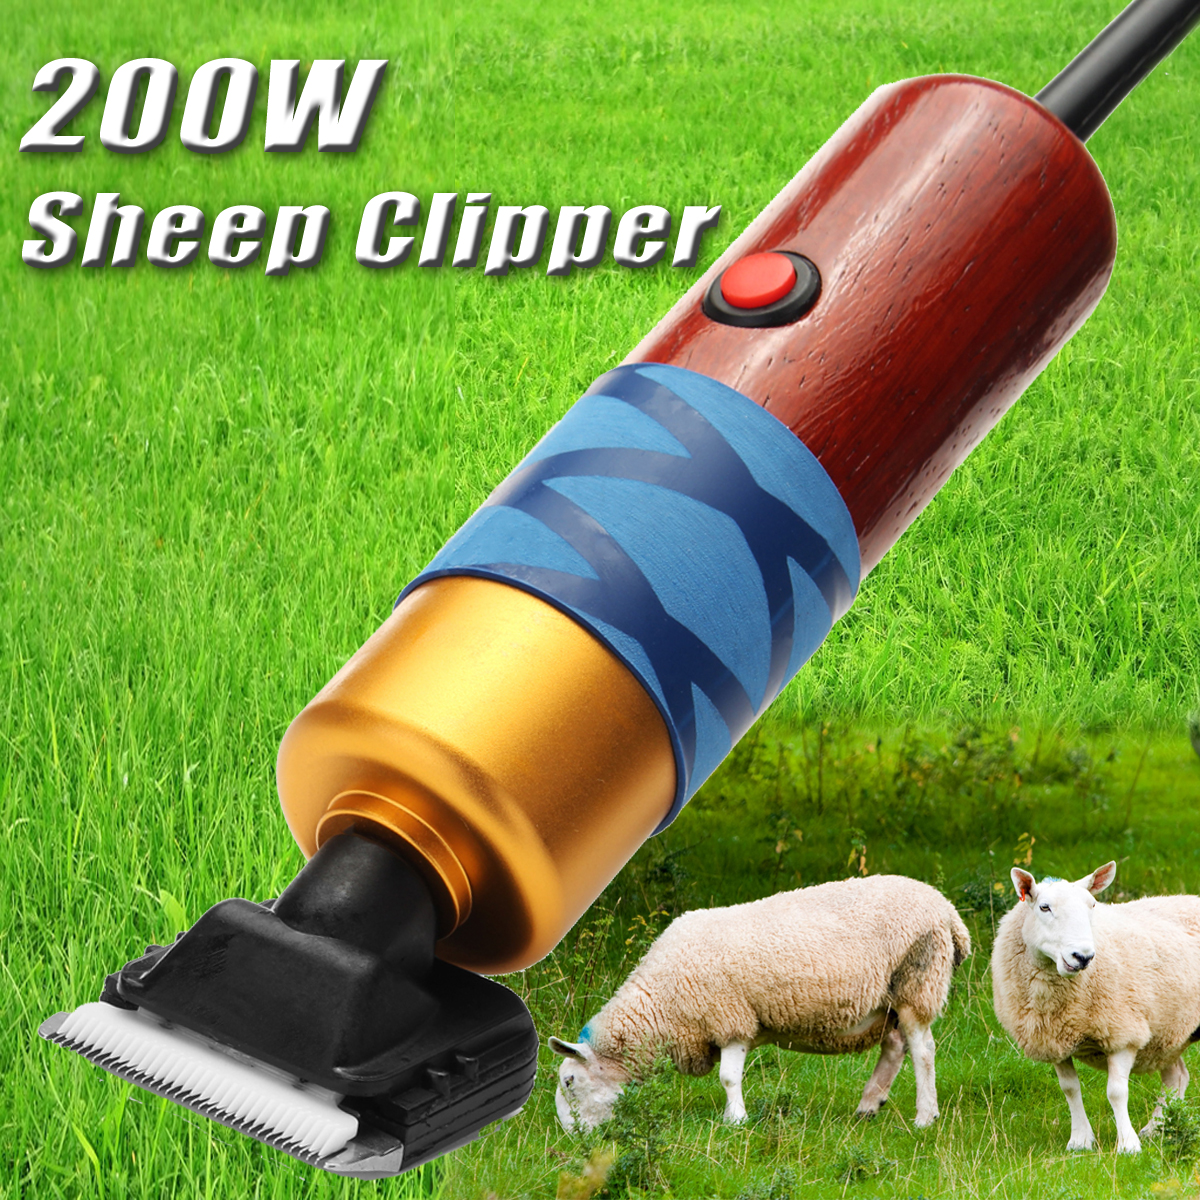 200W-Sheep-Clipper-Professional-Dog-Grooming-Kit-For-Rabbit-Pet-Dog-Grooming-Tools-1279973-1